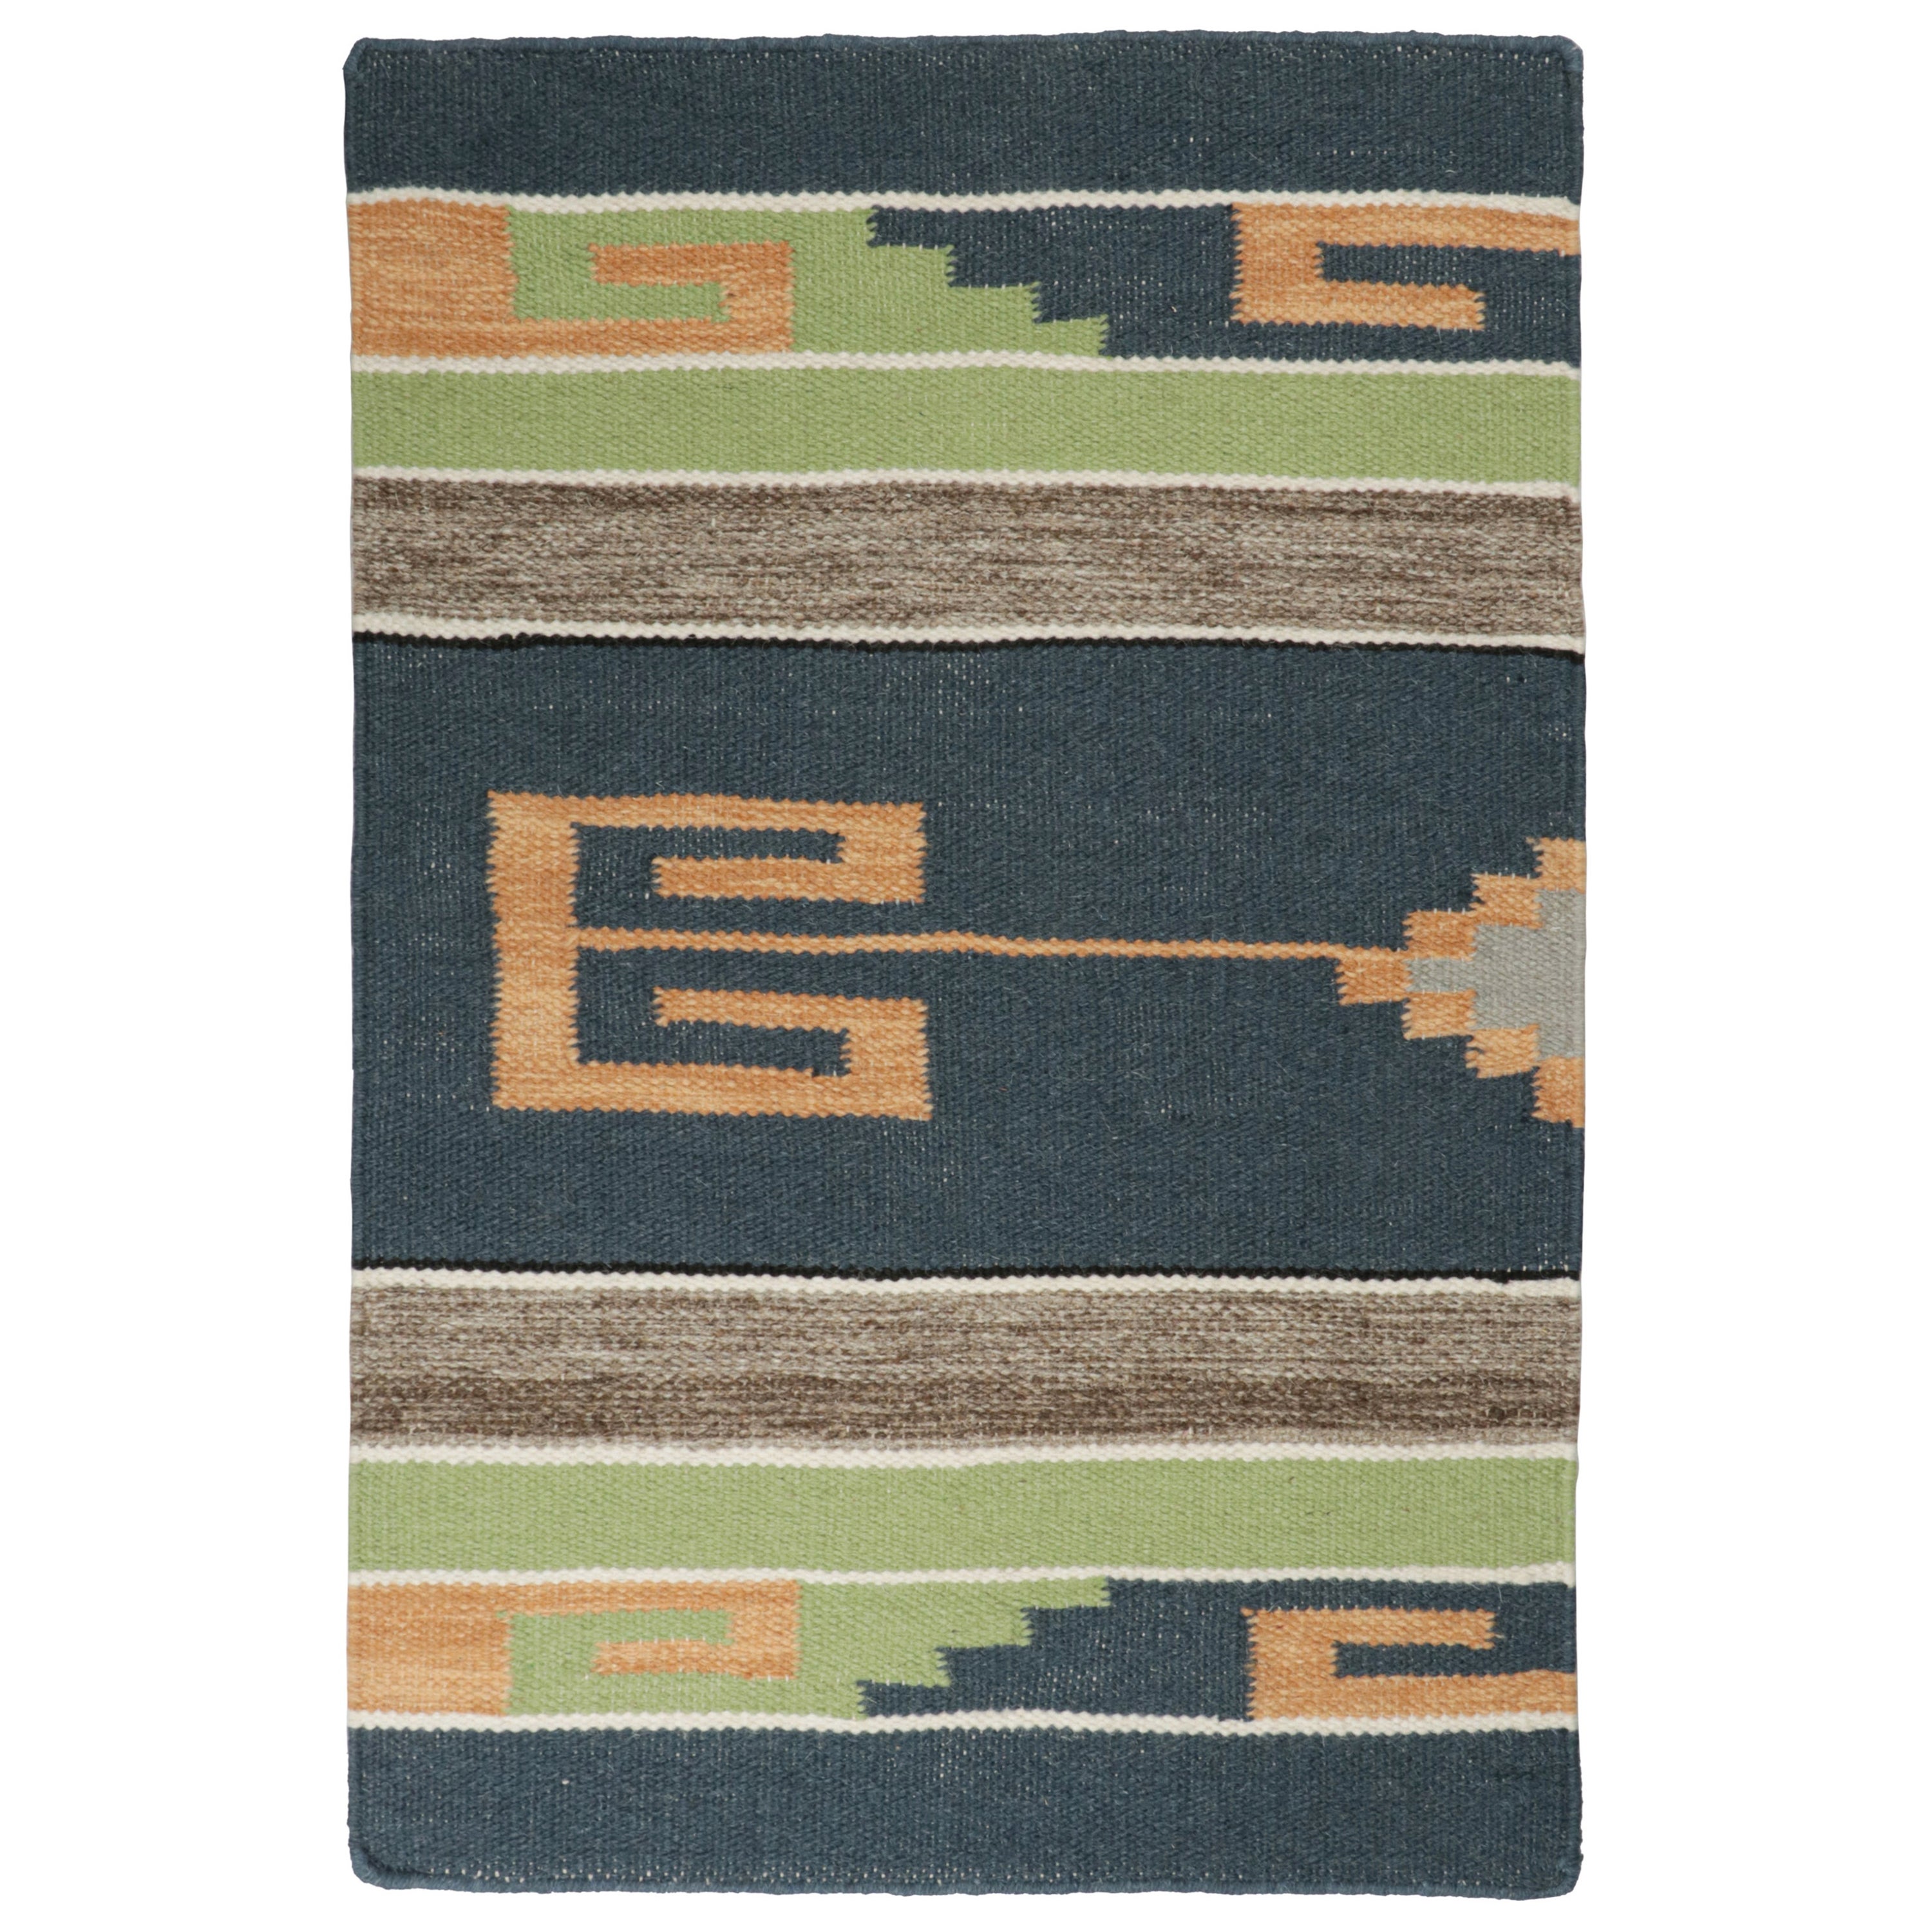 Rug & Kilim’s Tribal style Kilim in Blue, Gold, Green Patterns For Sale